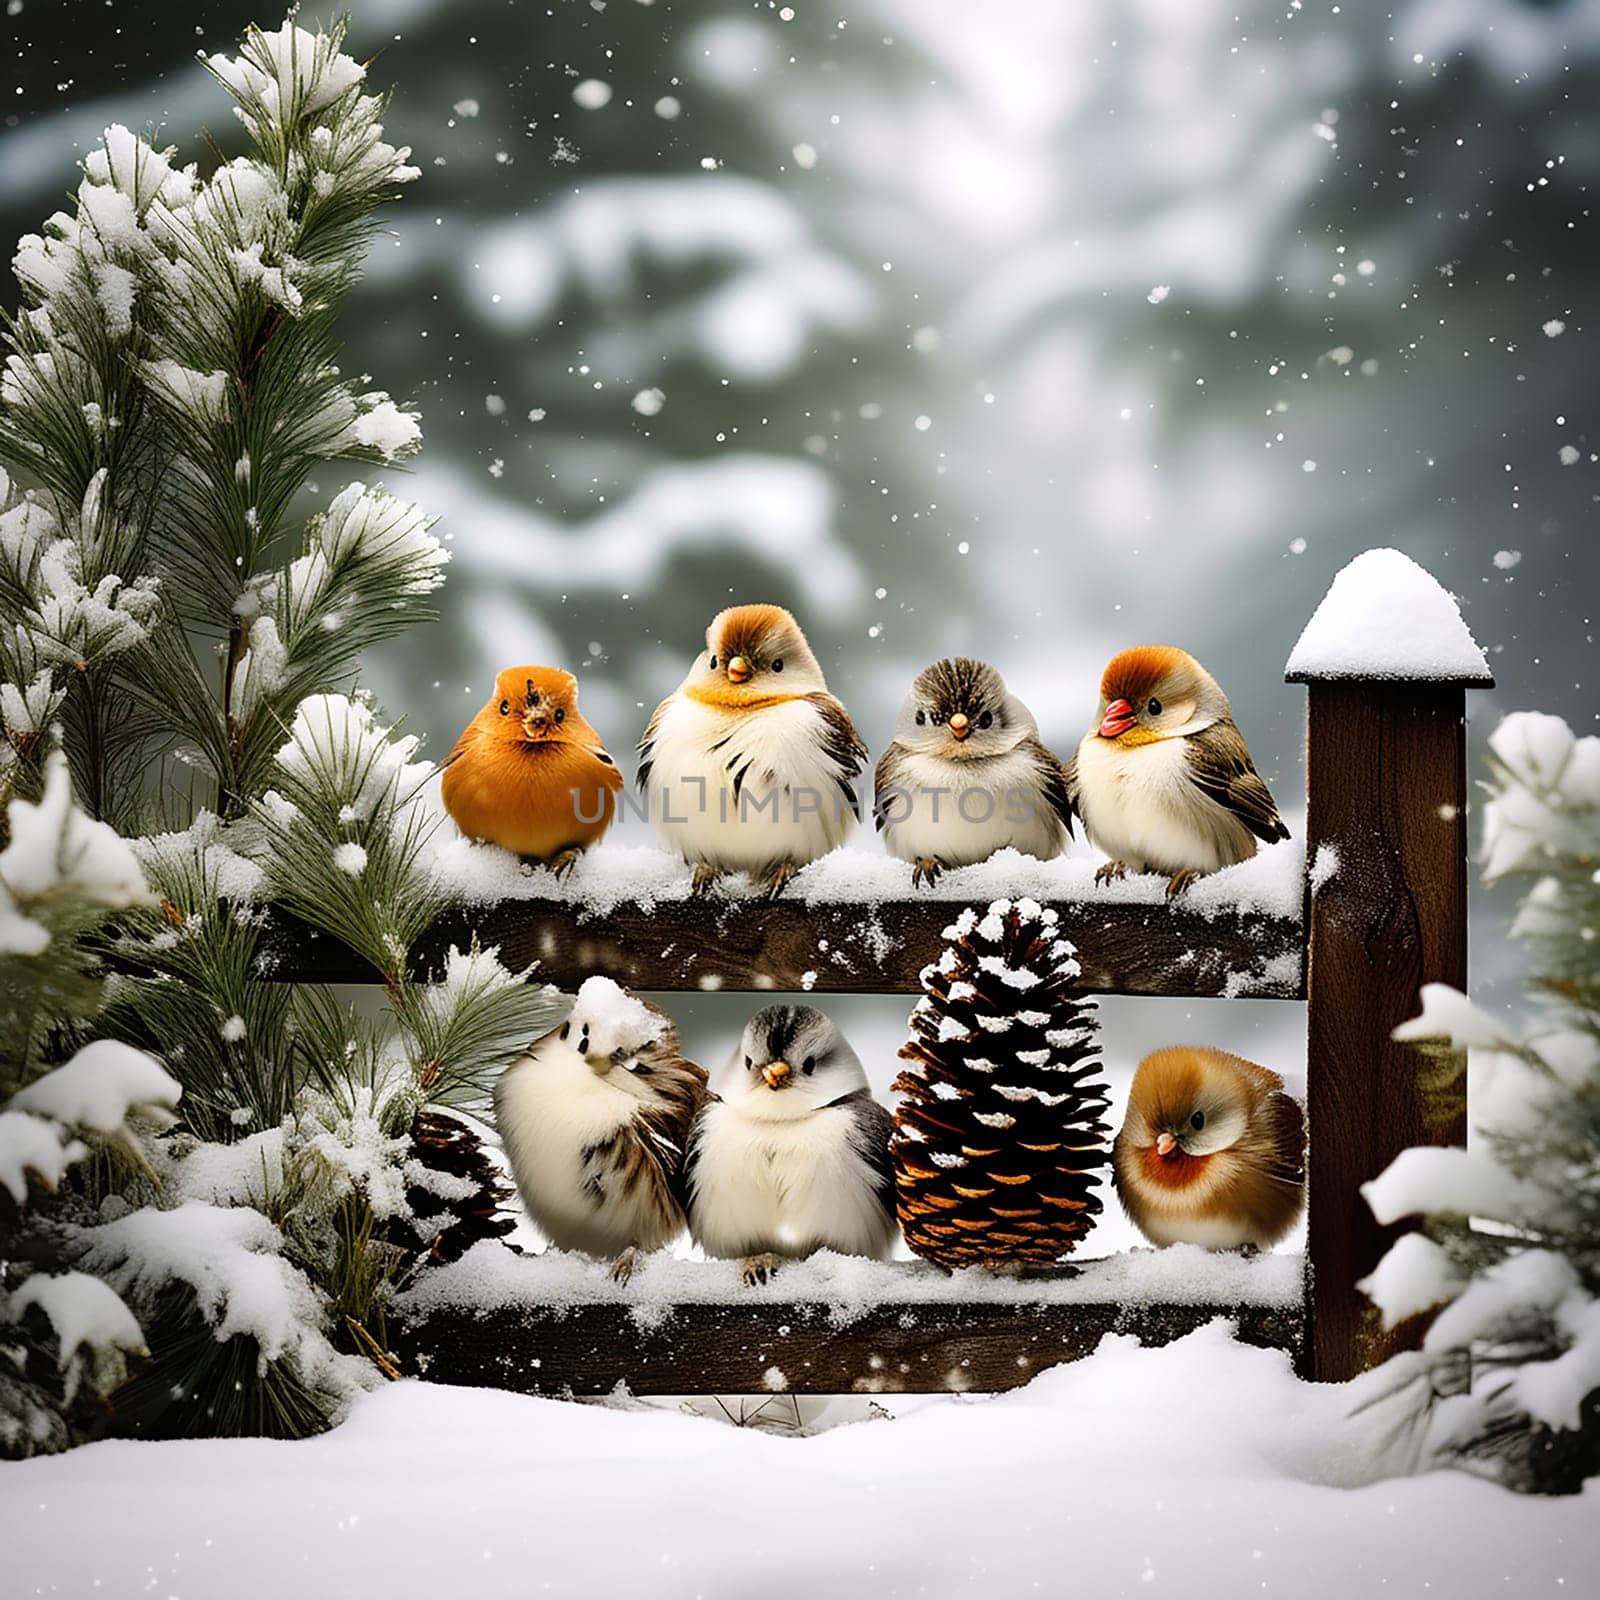 Animals Behind a Wooden Fence with Falling Snow and Pine Needle Branches